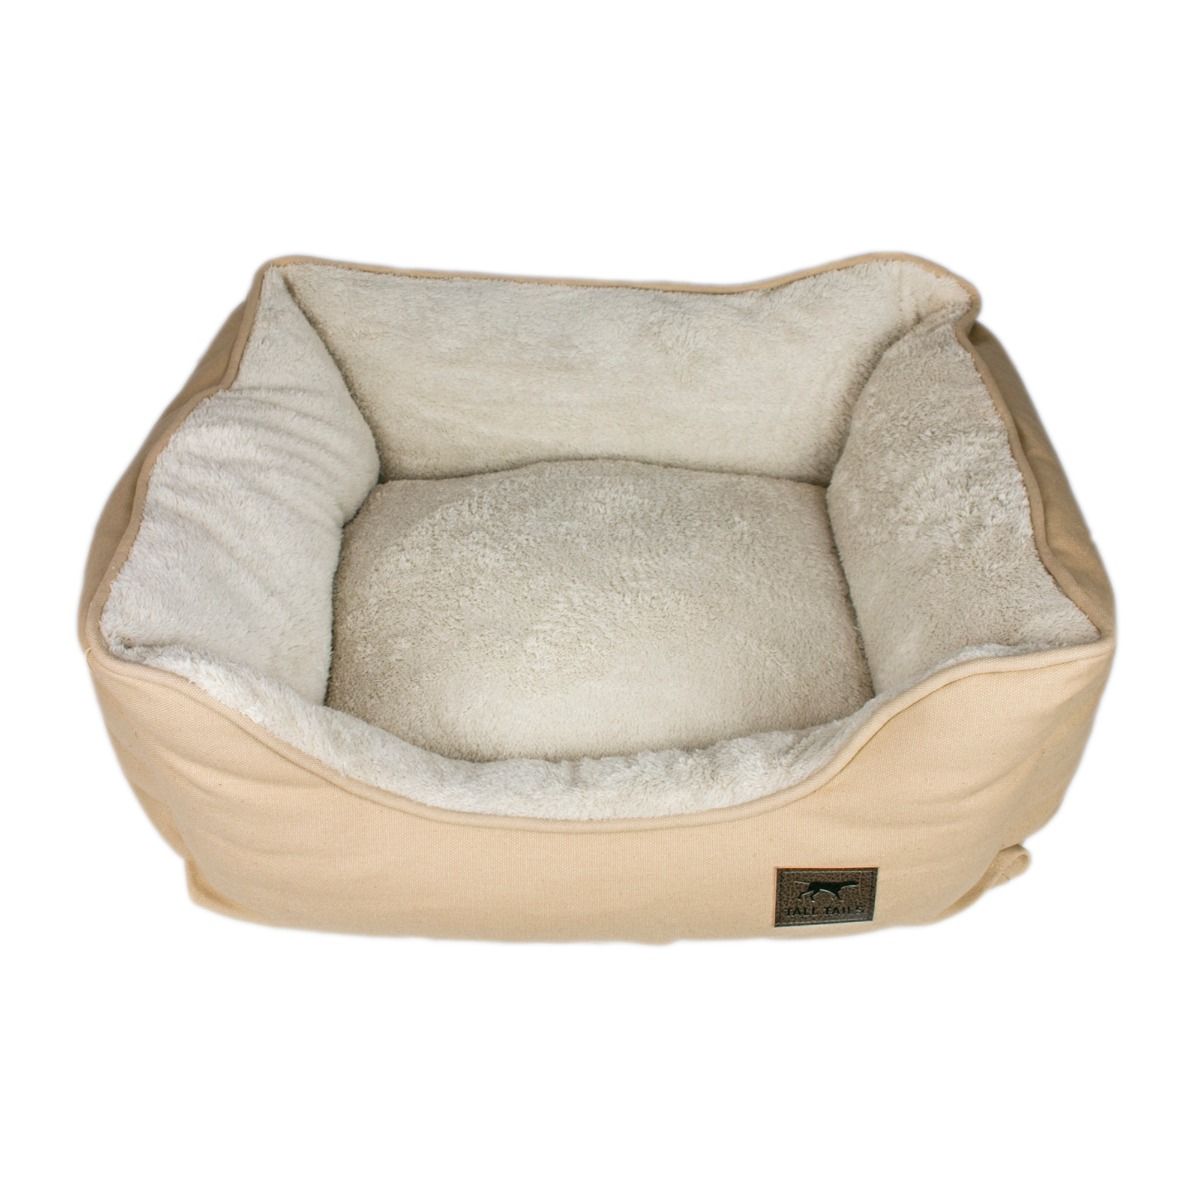 Tall Tails Bolster Beds - Happy Hounds Pet Supply